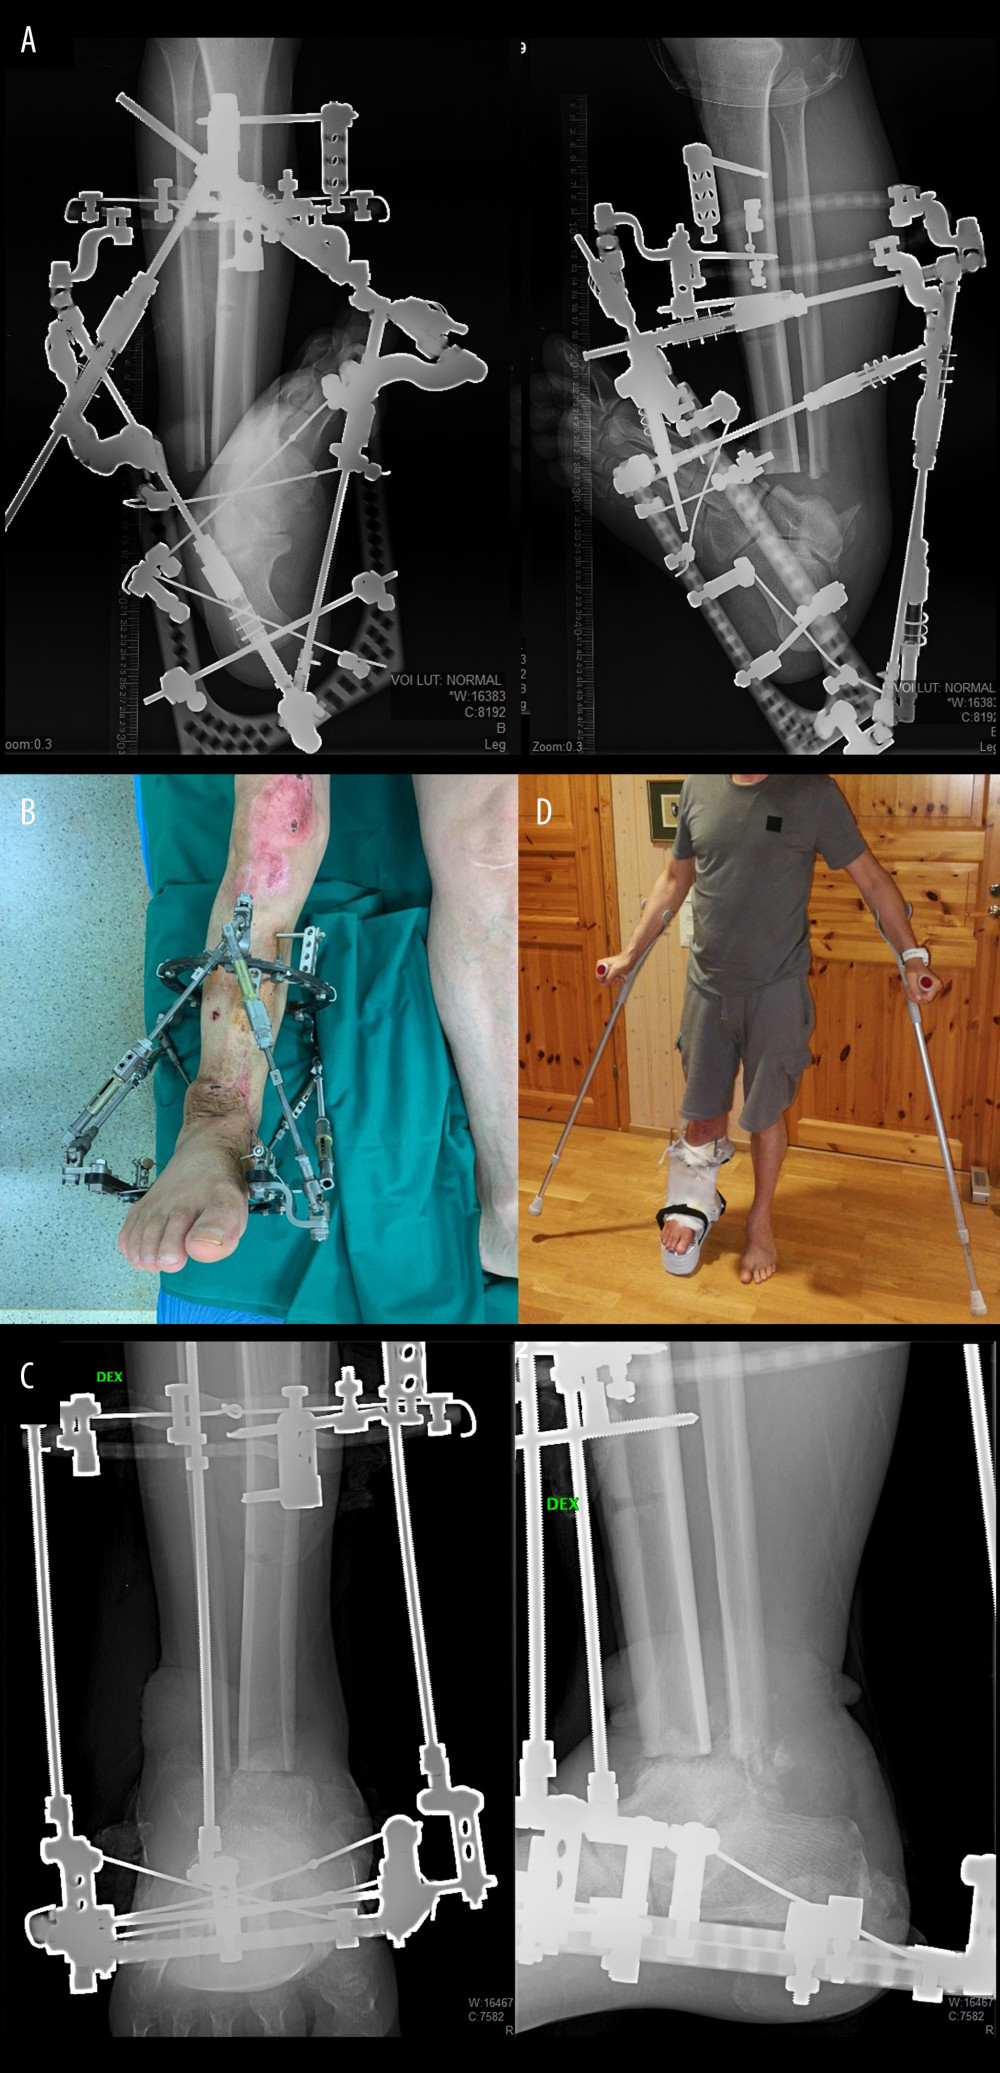 (A) X-rays (anteroposterior and lateral) after orthopedic hexapod mounting, to perform the deformity correction calculations. (B) Clinical photograph showing the end of artificial deformity correction using orthopedic hexapod. (C) X-ray (anteroposterior and lateral) presenting talocrural arthrodesis as fixation method using the Ilizarov frame. (D) Clinical photograph showing the patient before discharging from the hospital using crutches with partial weight-bearing.